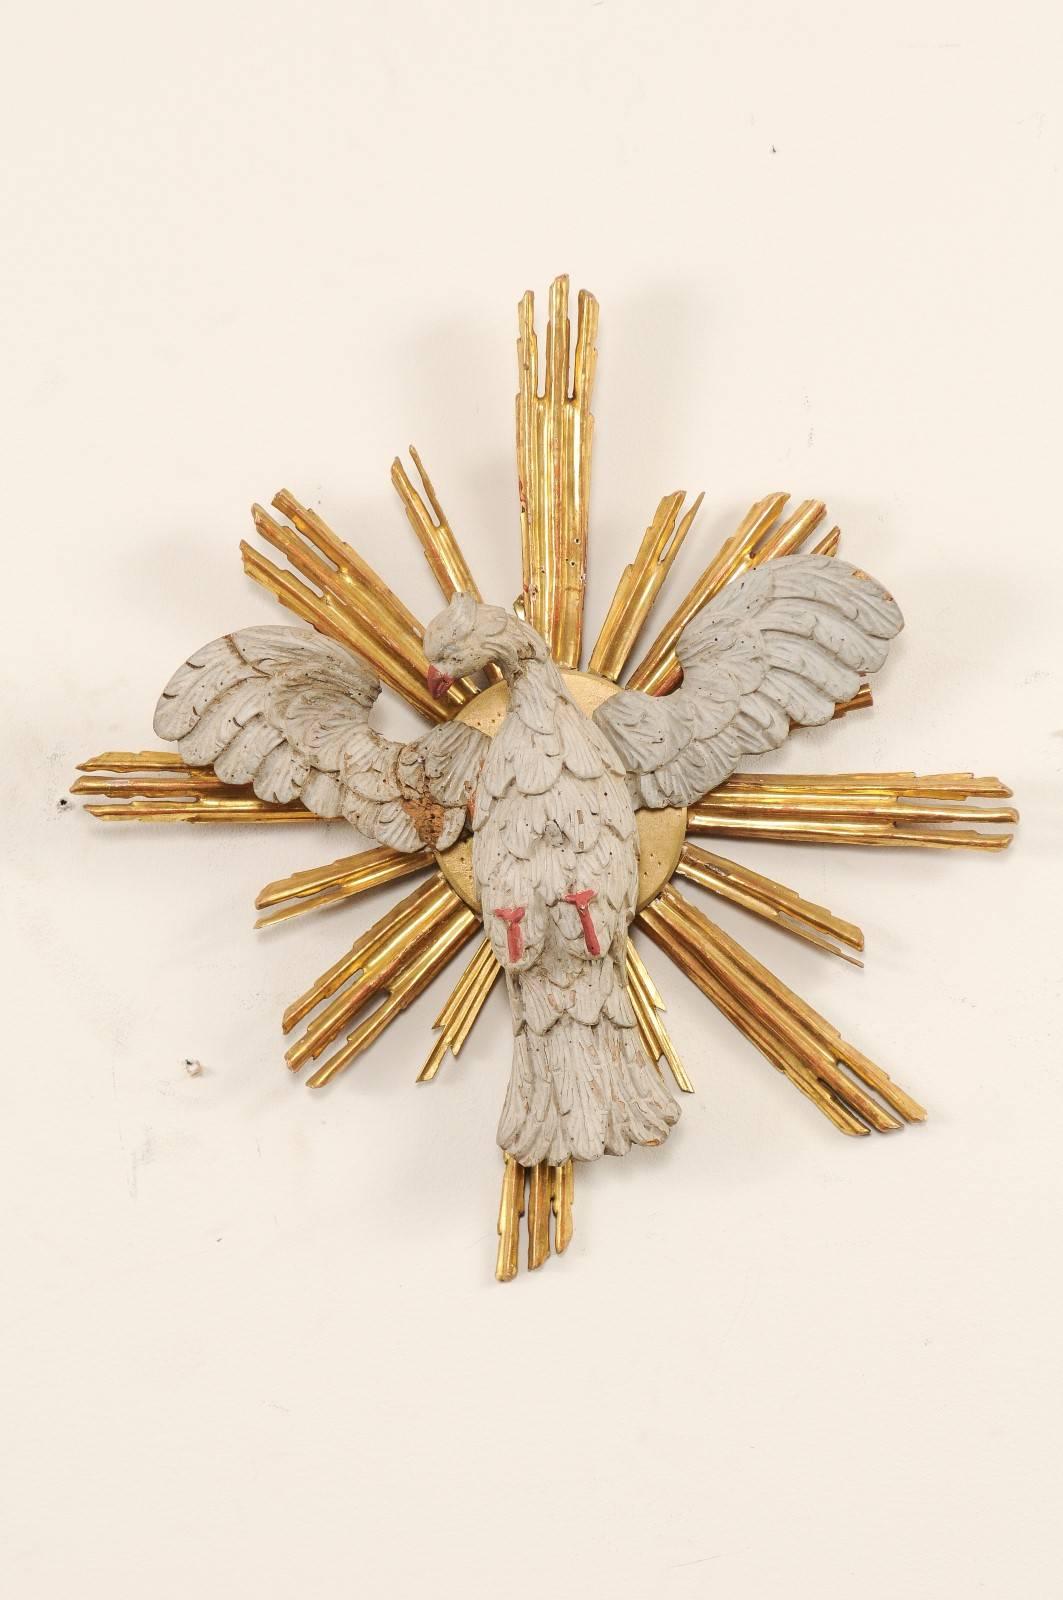 A 19th century Italian altar piece fragment. This antique fragment was once part of an Italian altar piece. This hand-carved fragment depicts a painted dove, with wings spread and head tilted to its side, atop a gold gilt sunray bursting out from